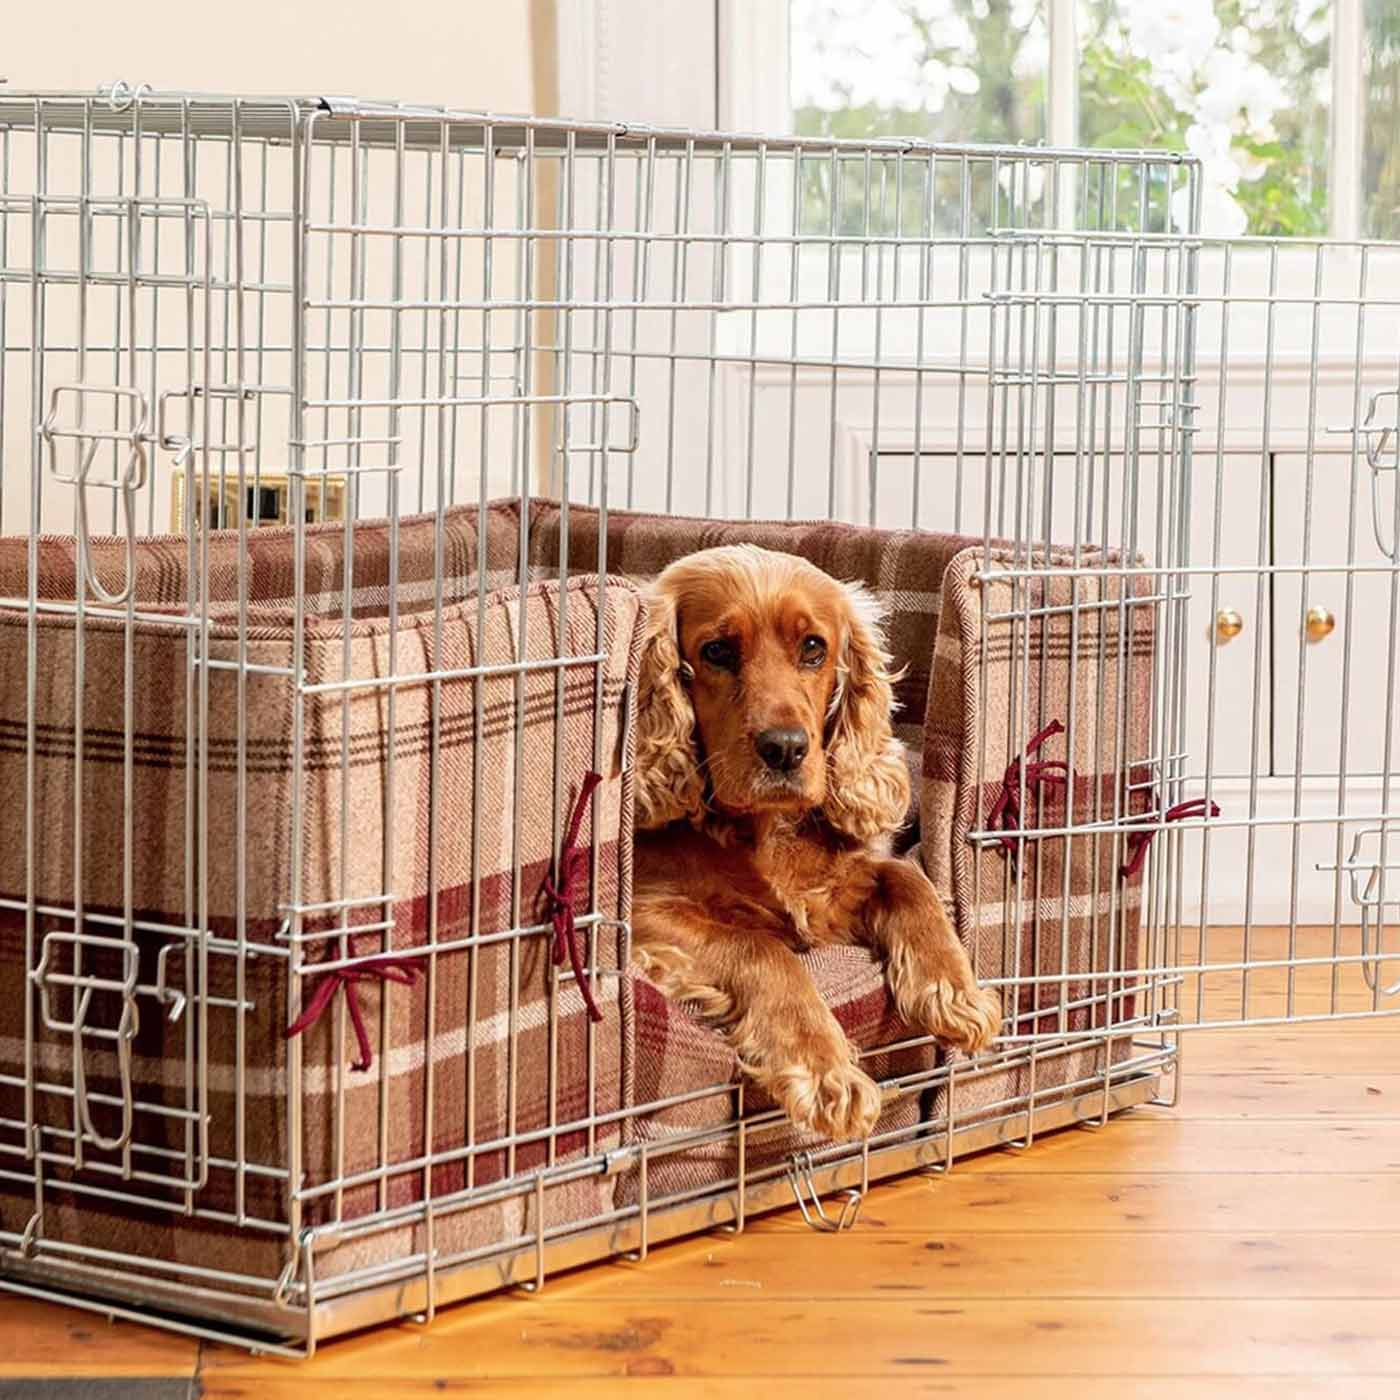 Luxury Dog Crate Bumper, Balmoral Mulberry Tweed Crate Bumper Cover, The Perfect Dog Crate Accessory, Available Now at Lords & Labradors